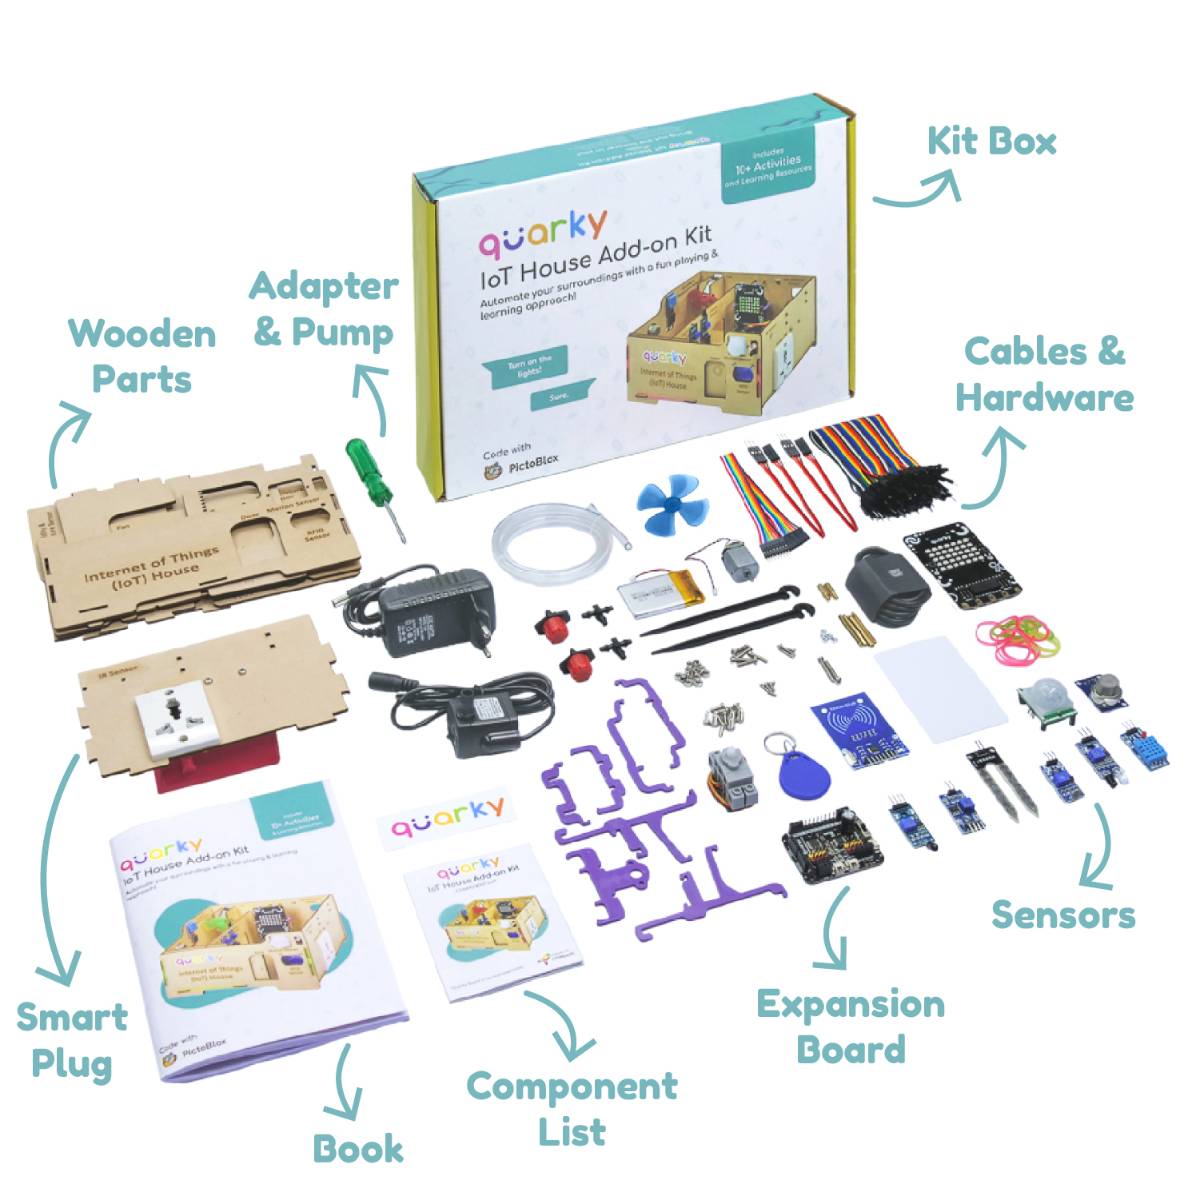 Quarky IoT House Add-on Kit components: Sensors, expansion board, smart plug, and more for building smart home projects.